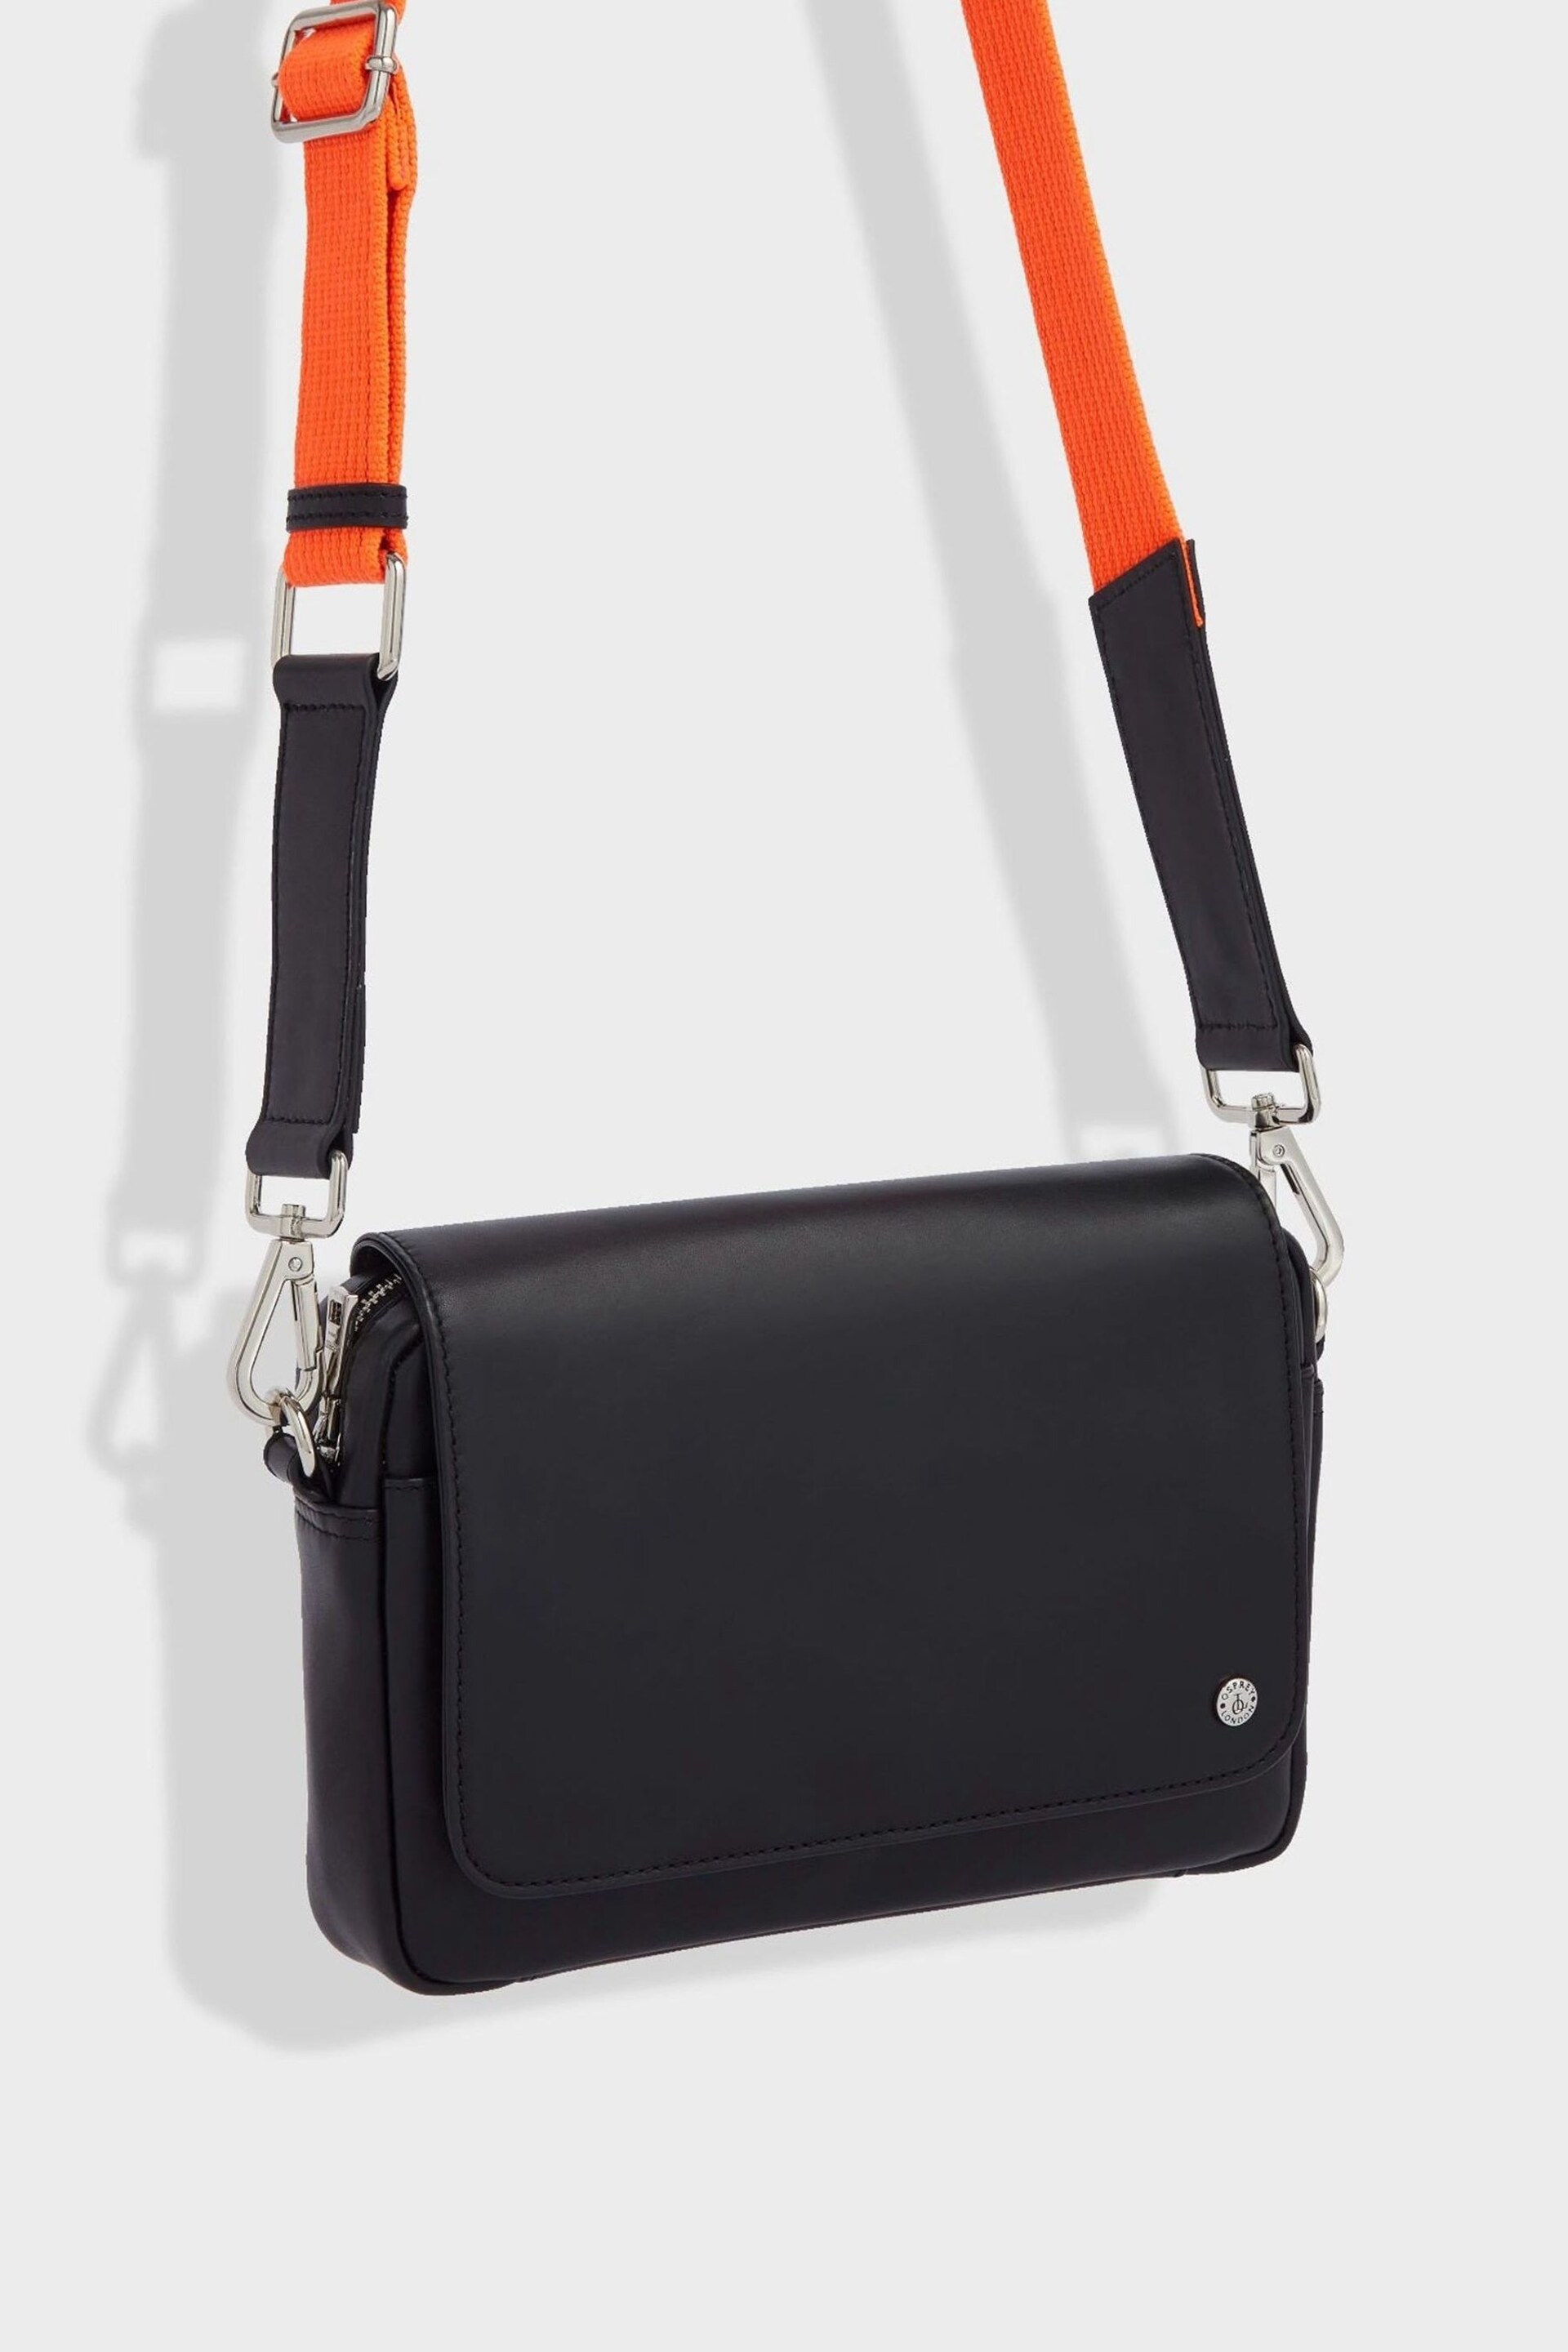 OSPREY LONDON The Hoxton Leather Cross-Body Black Bag - Image 2 of 7